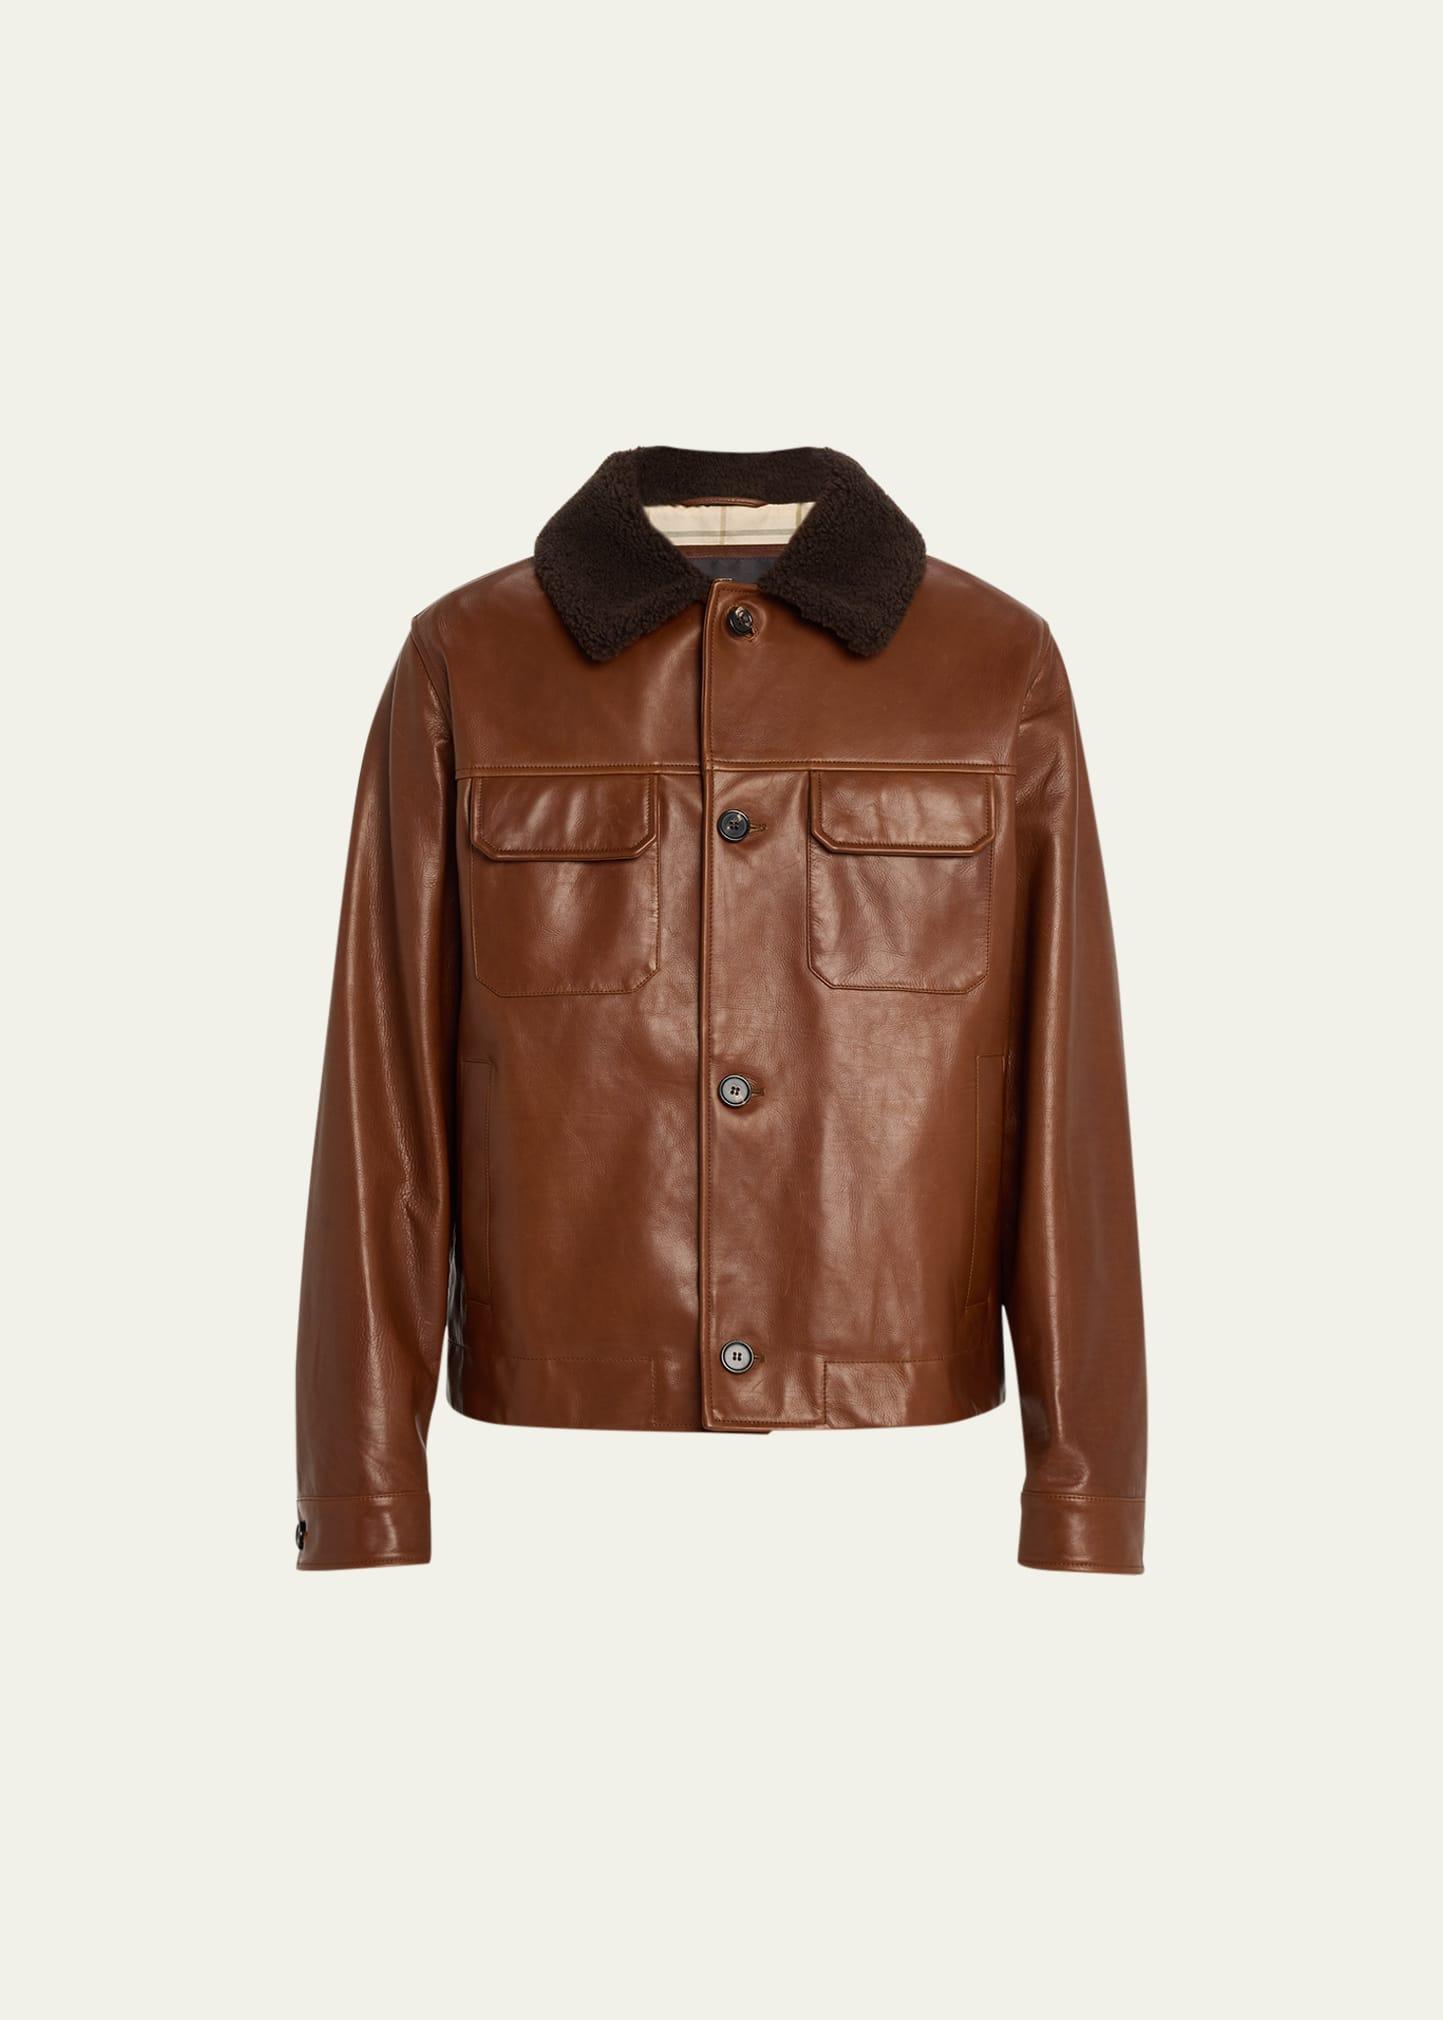 Mens Reefton Shearling-Collar Leather Jacket Product Image